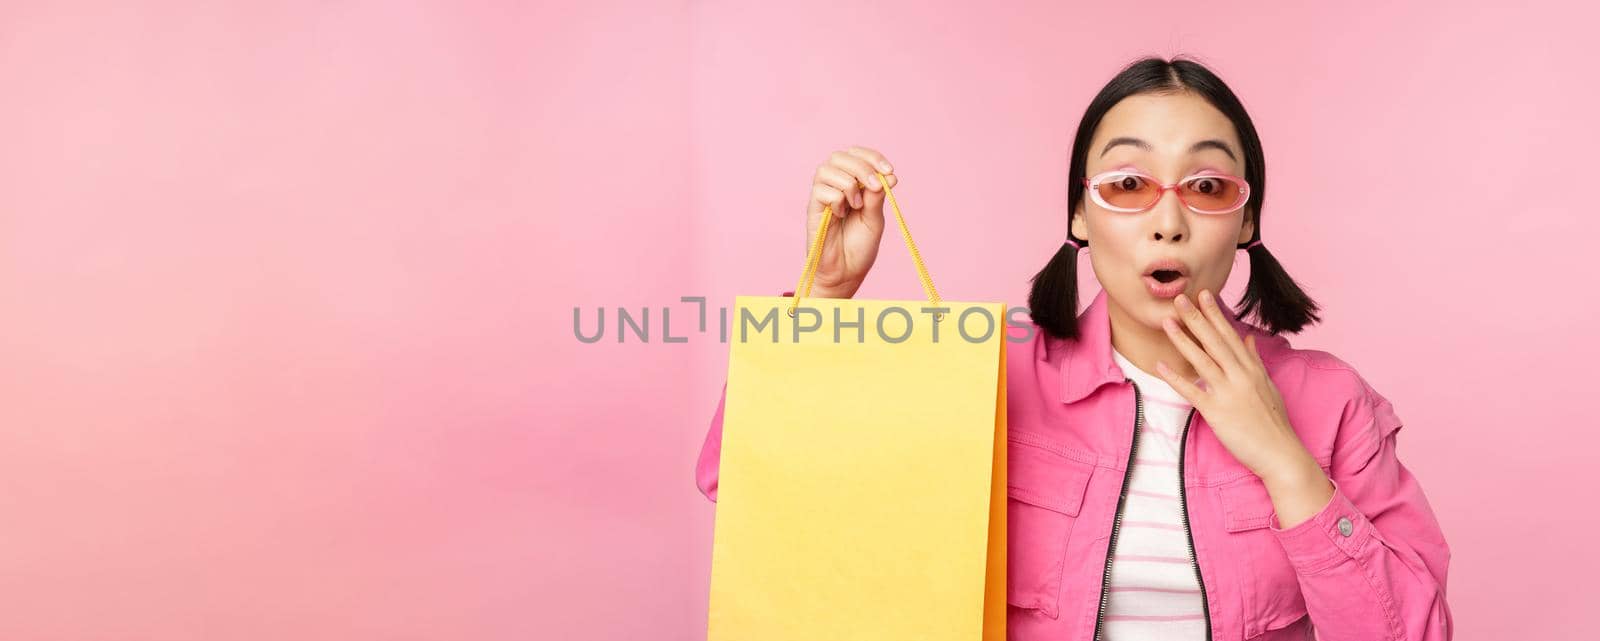 Shopping. Stylish asian girl in sunglasses, showing bag from shop and smiling, recommending sale promo in store, standing over pink background.